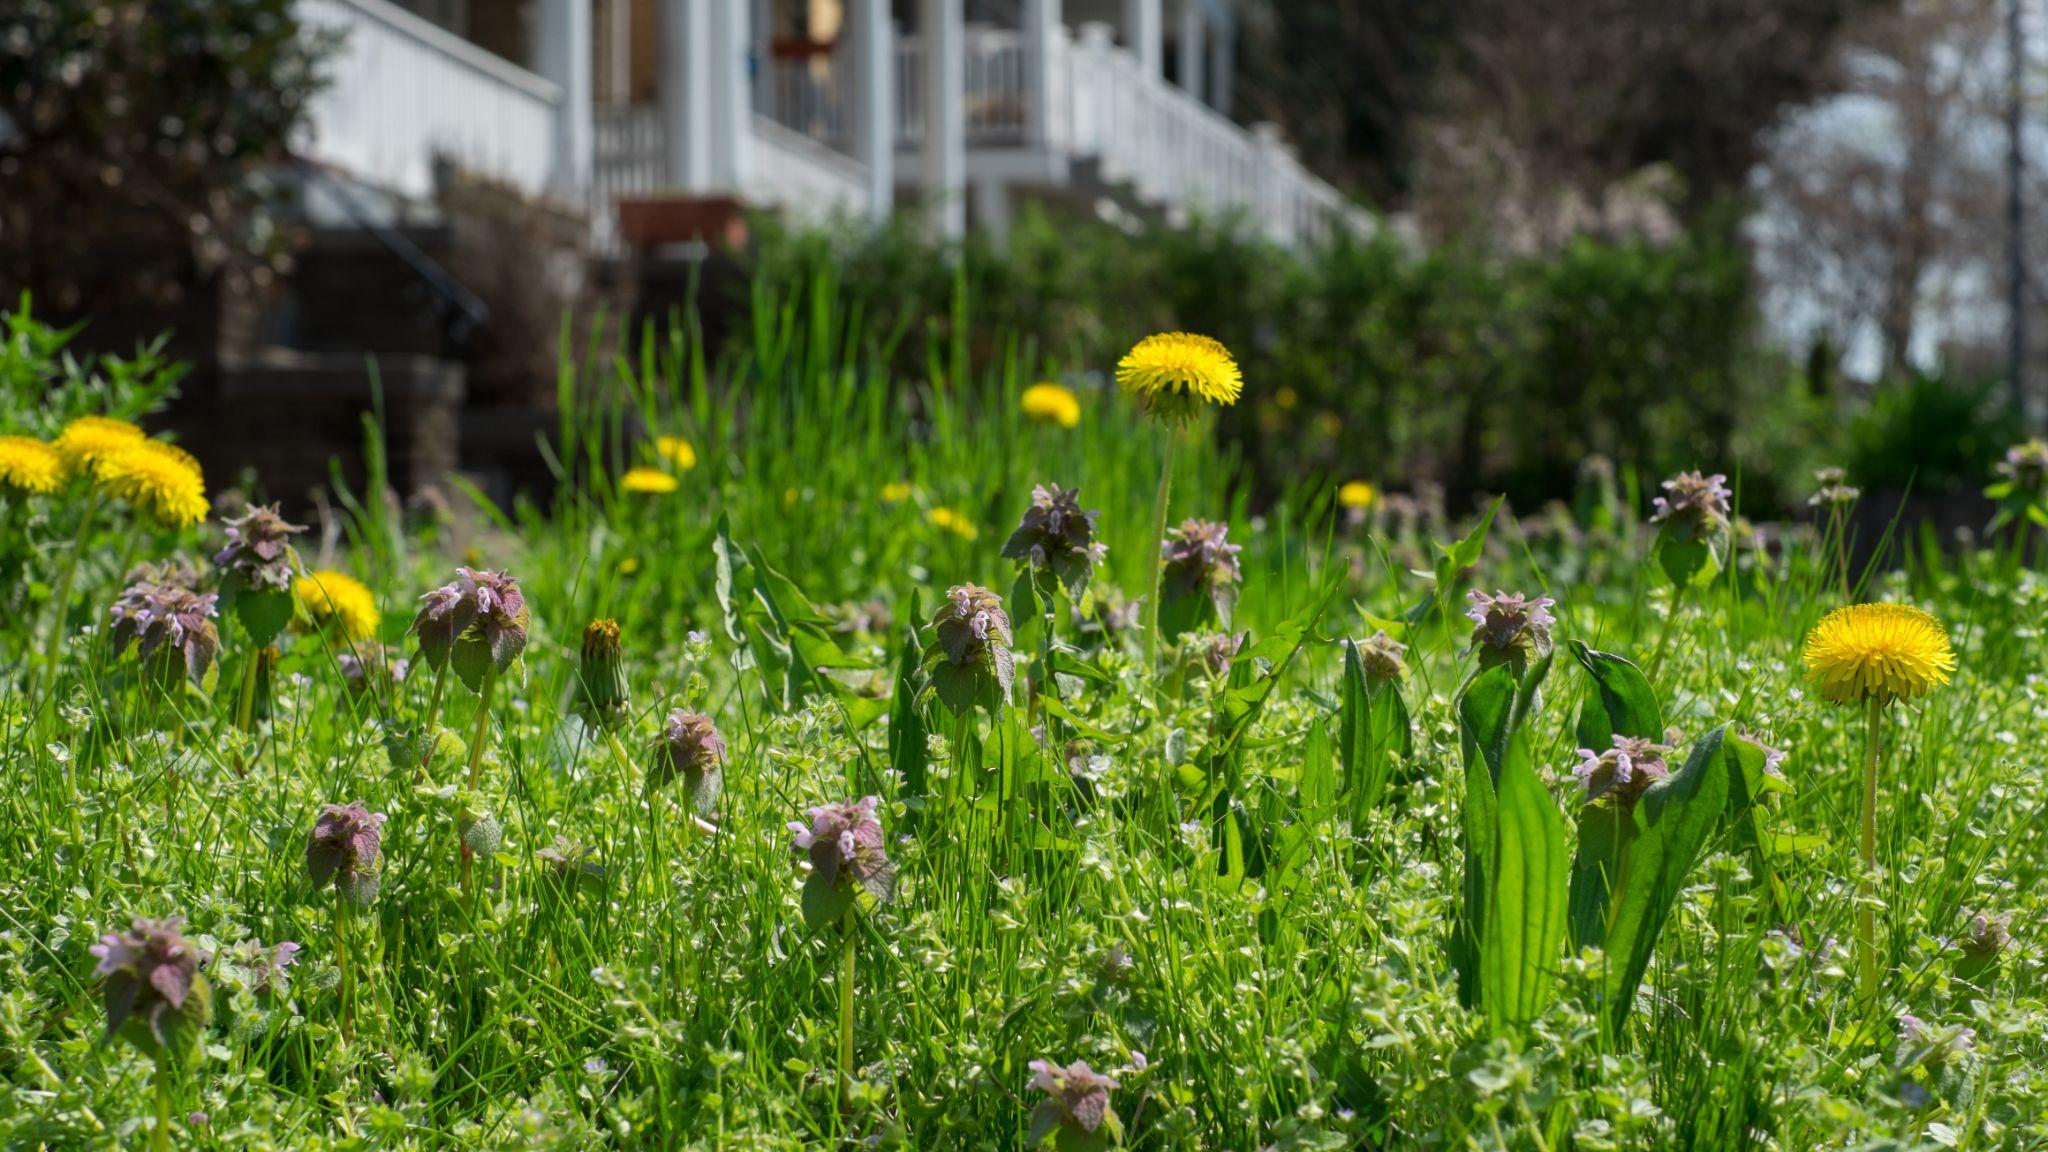 The Best Lawn Fertilizer For Spring - Detailed Buying Guide 2021